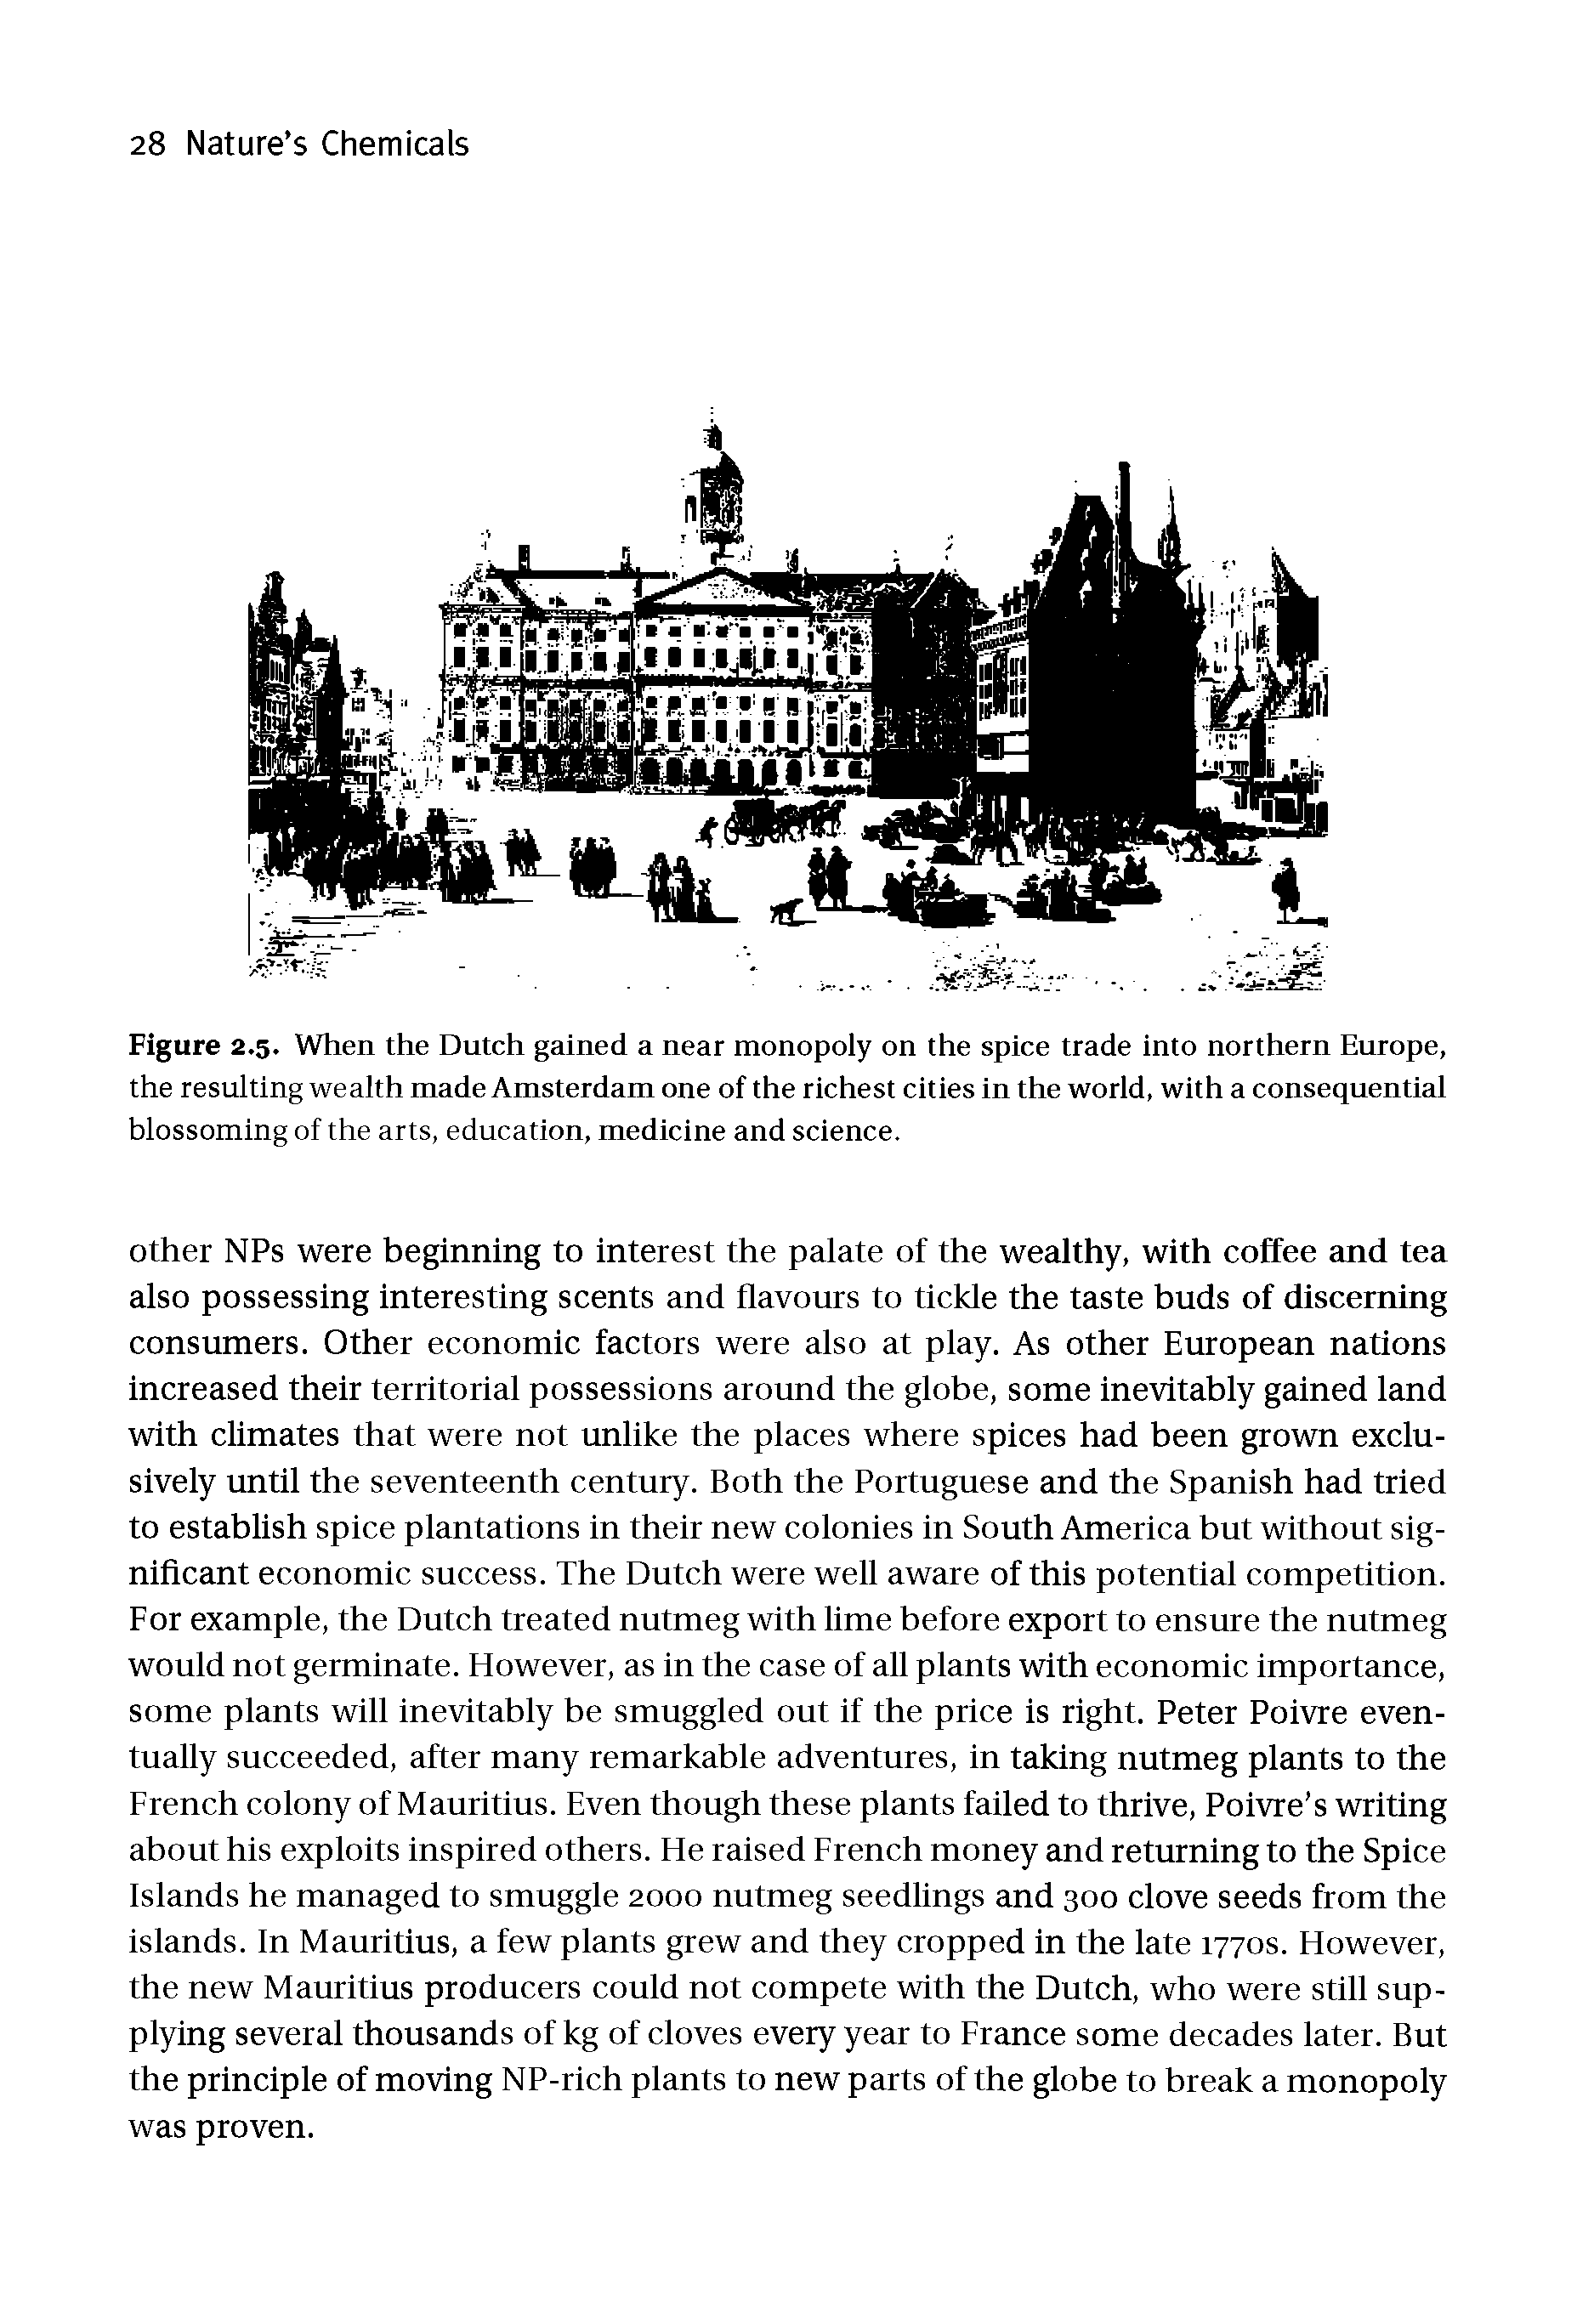 Figure 2.5. When the Dutch gained a near monopoly on the spice trade into northern Europe, the resulting wealth made Amsterdam one of the richest cities in the world, with a consequential blossoming of the arts, education, medicine and science.